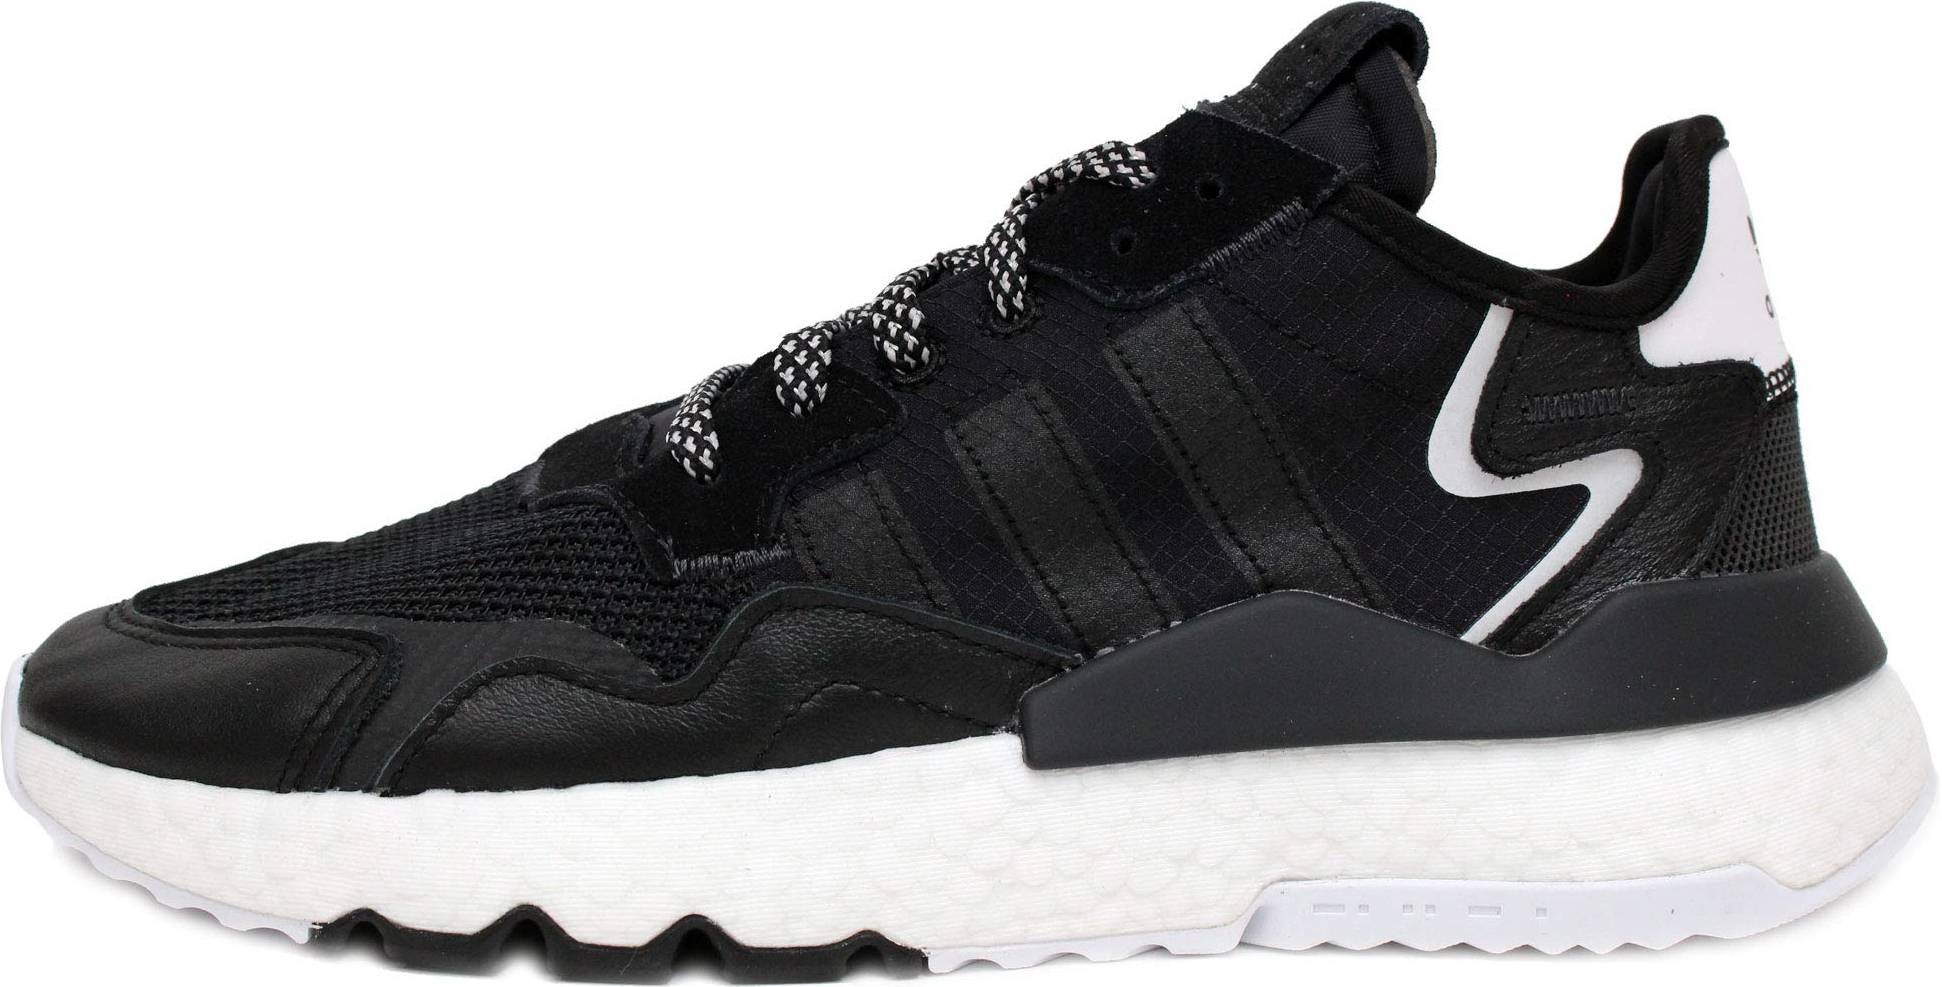 Only £45 + Review of Adidas Nite Jogger 